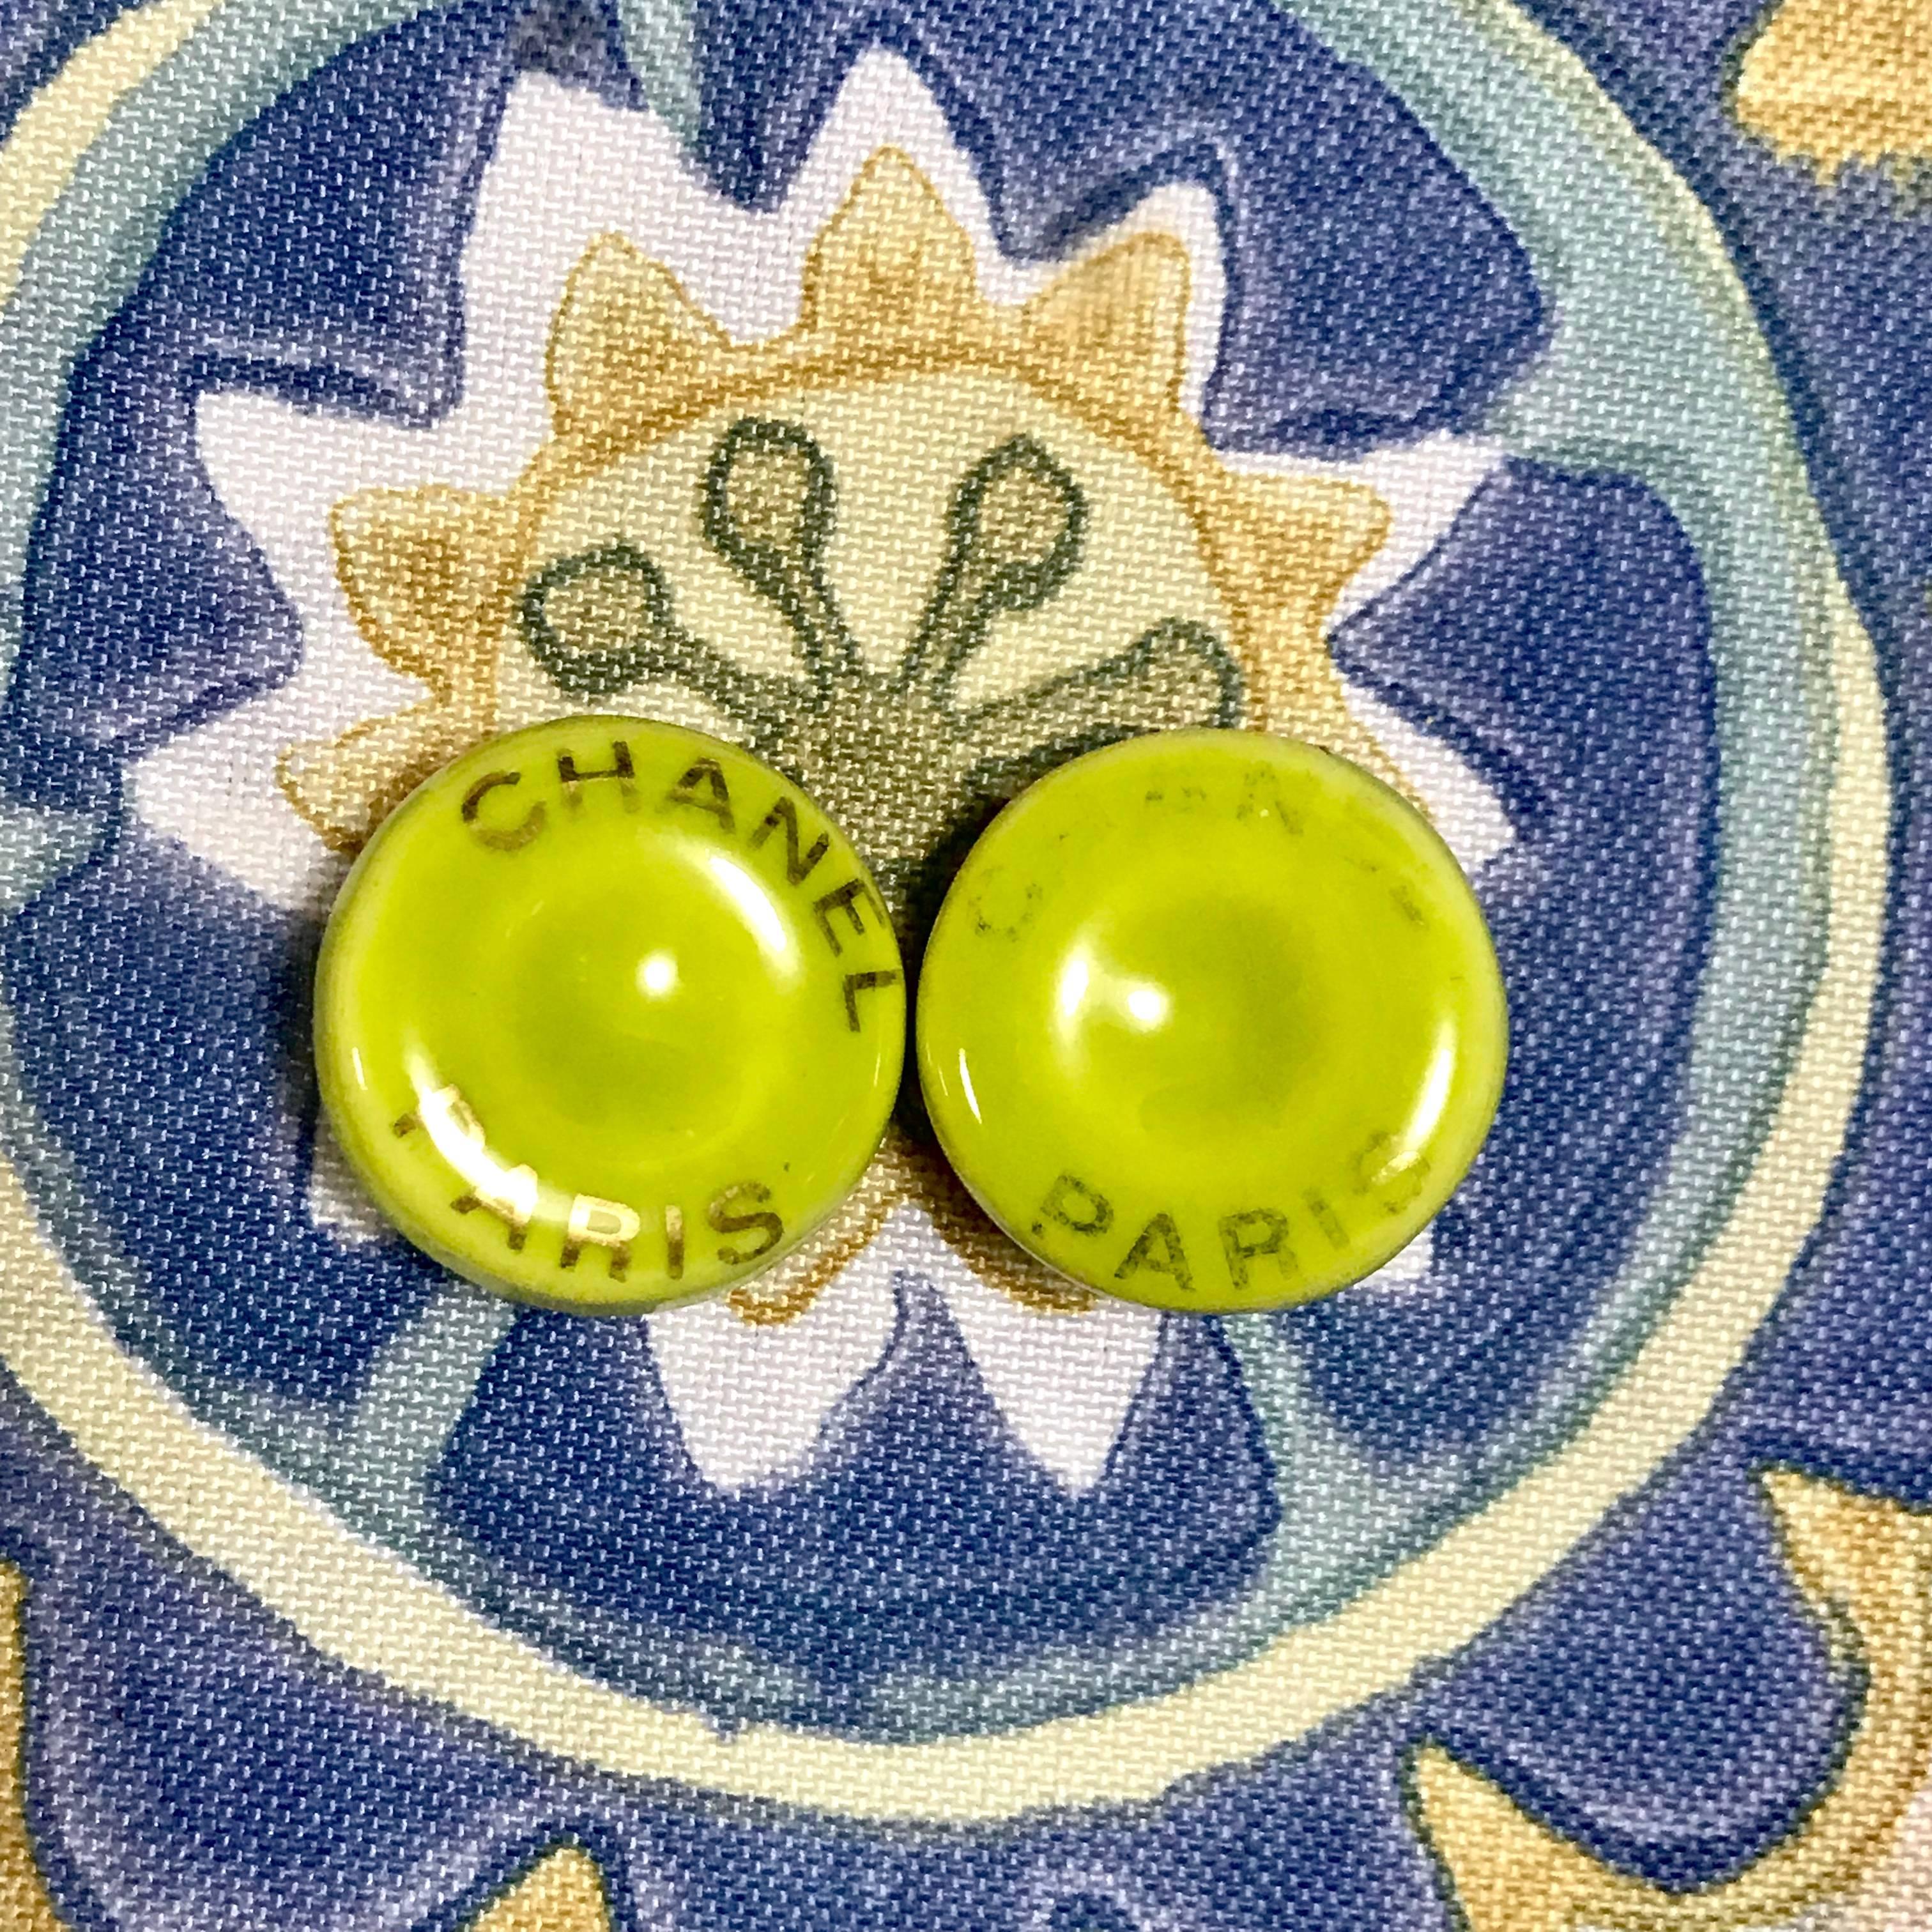 1990s. Vintage CHANEL yellow green, lime color and gold tone round button candy earrings. Perfect Chanel jewelry for any seasons.

Fun and Chic and Gorgeous CHANEL earrings for you or your loved one! 
Great gift idea. 

Introducing a pair of unique